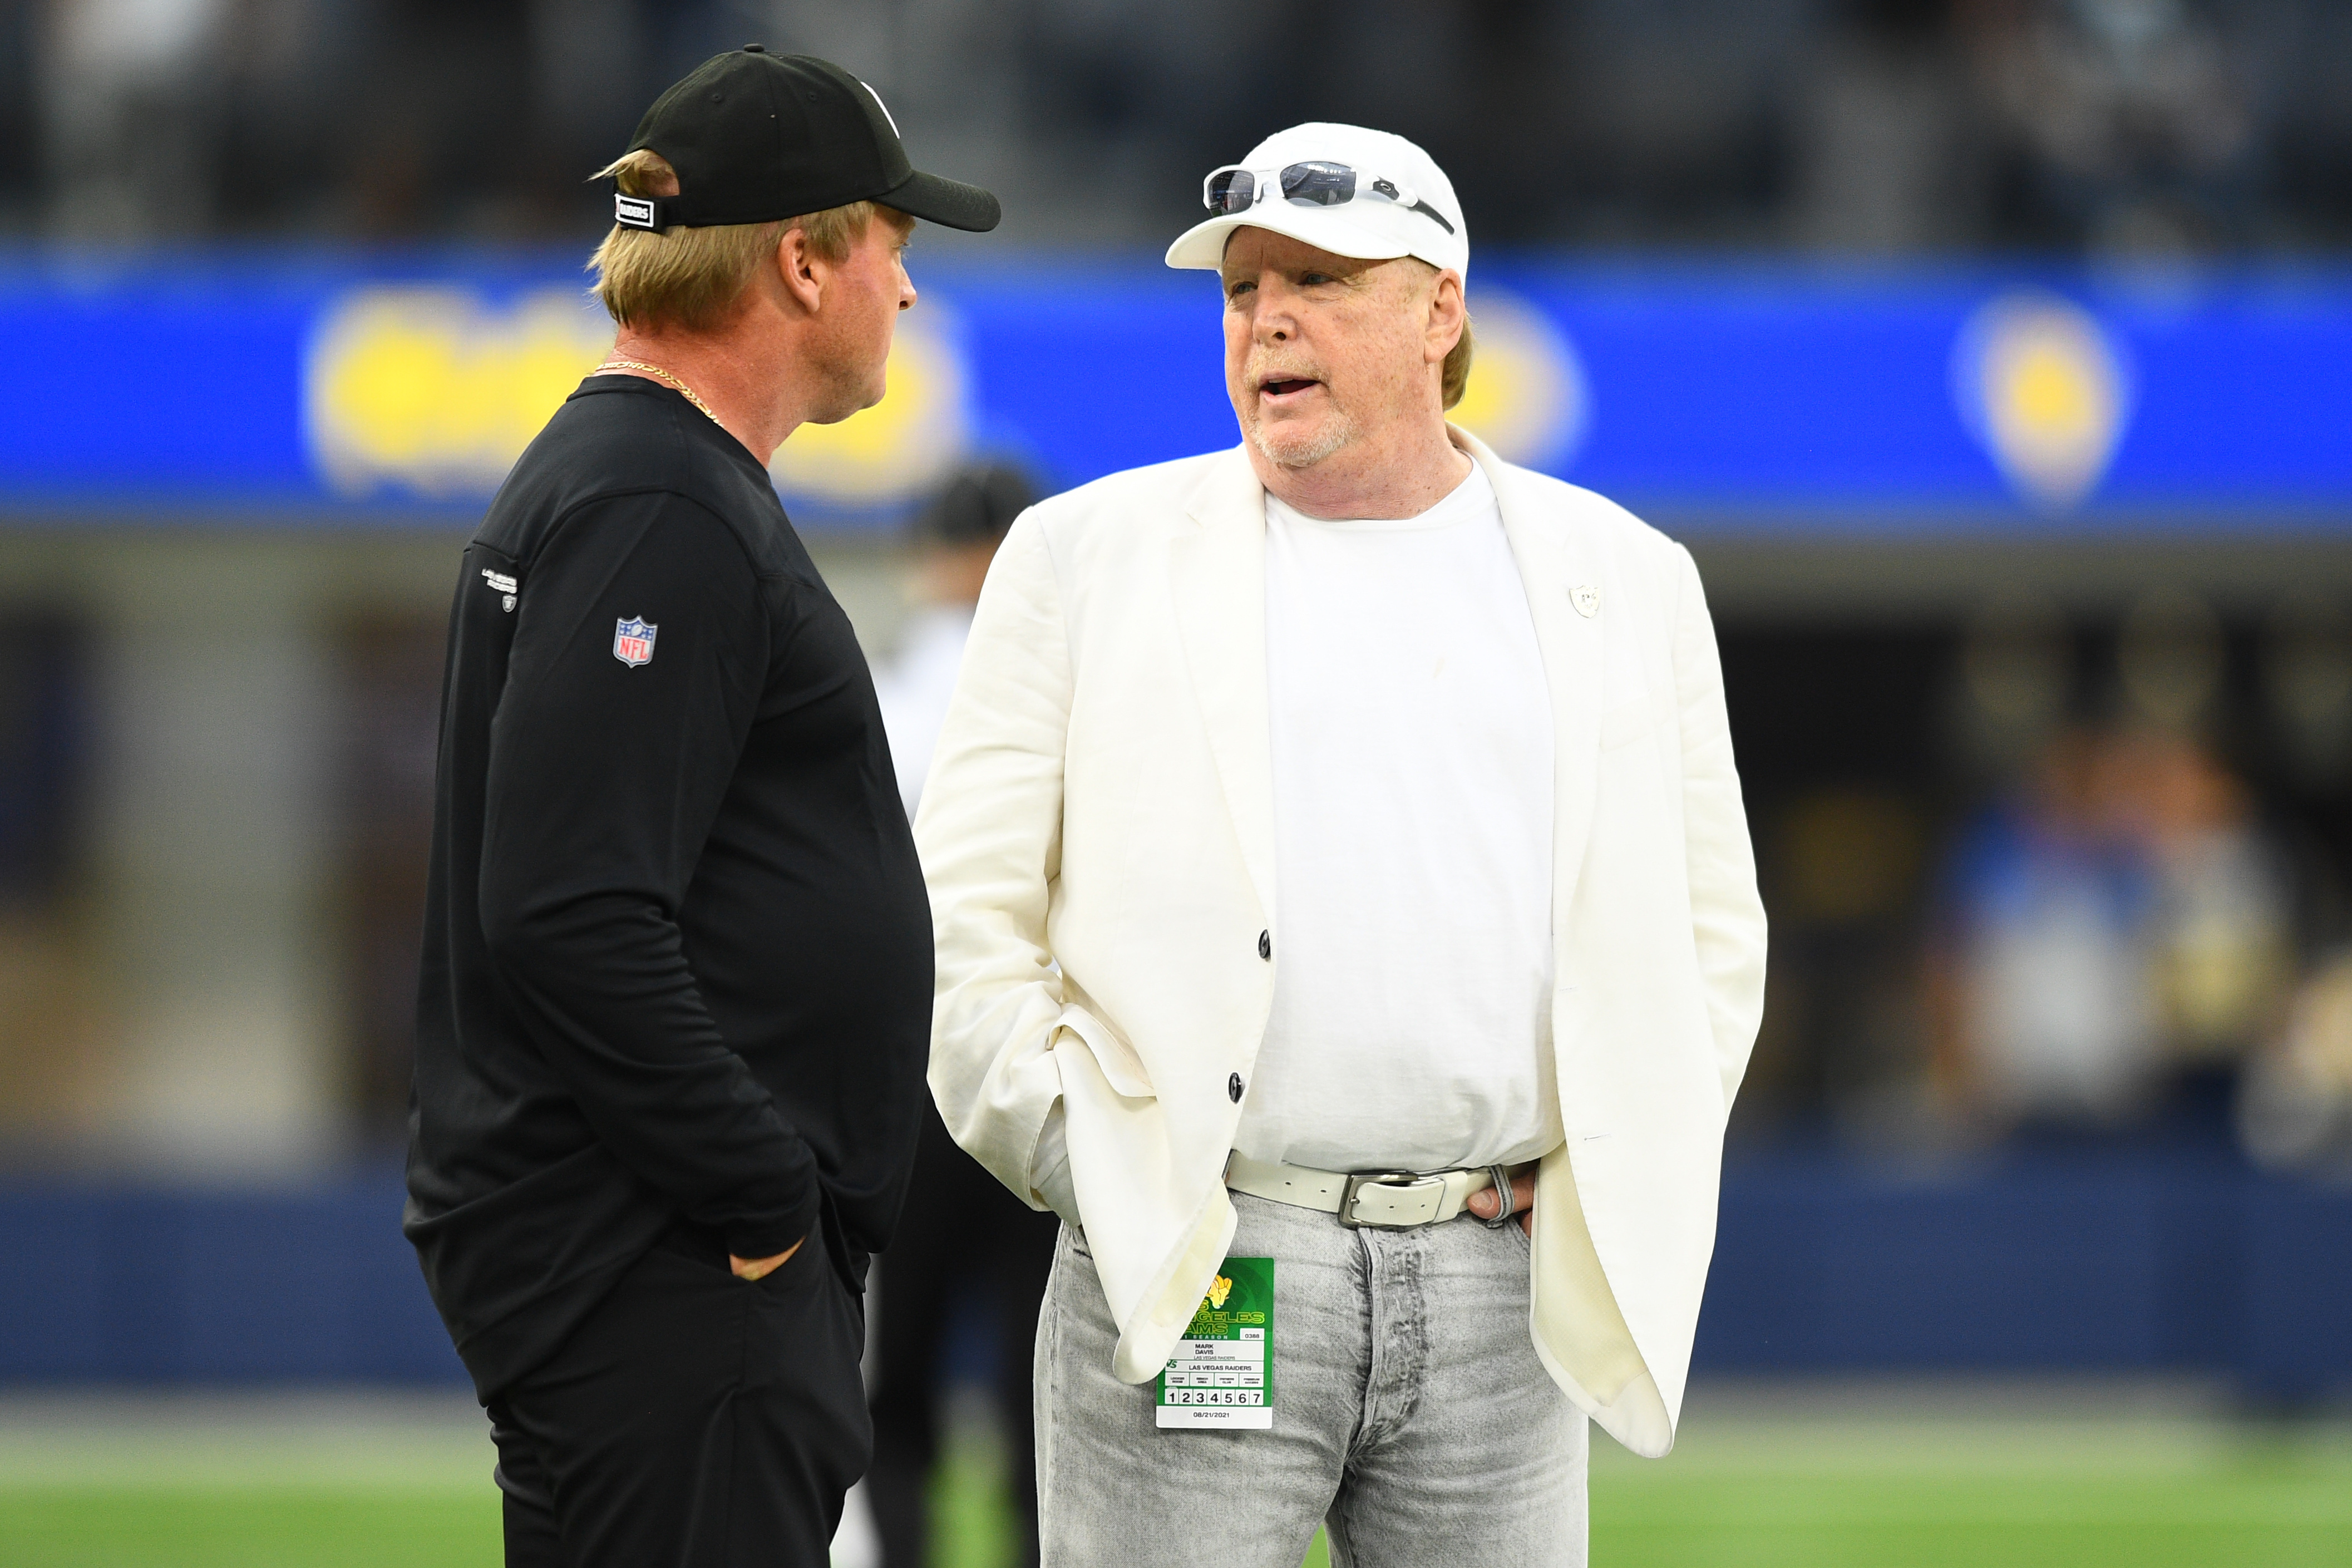 Bonsignore: Raiders owner Mark Davis, Las Vegas changed forever with NFL's  decision – Daily News